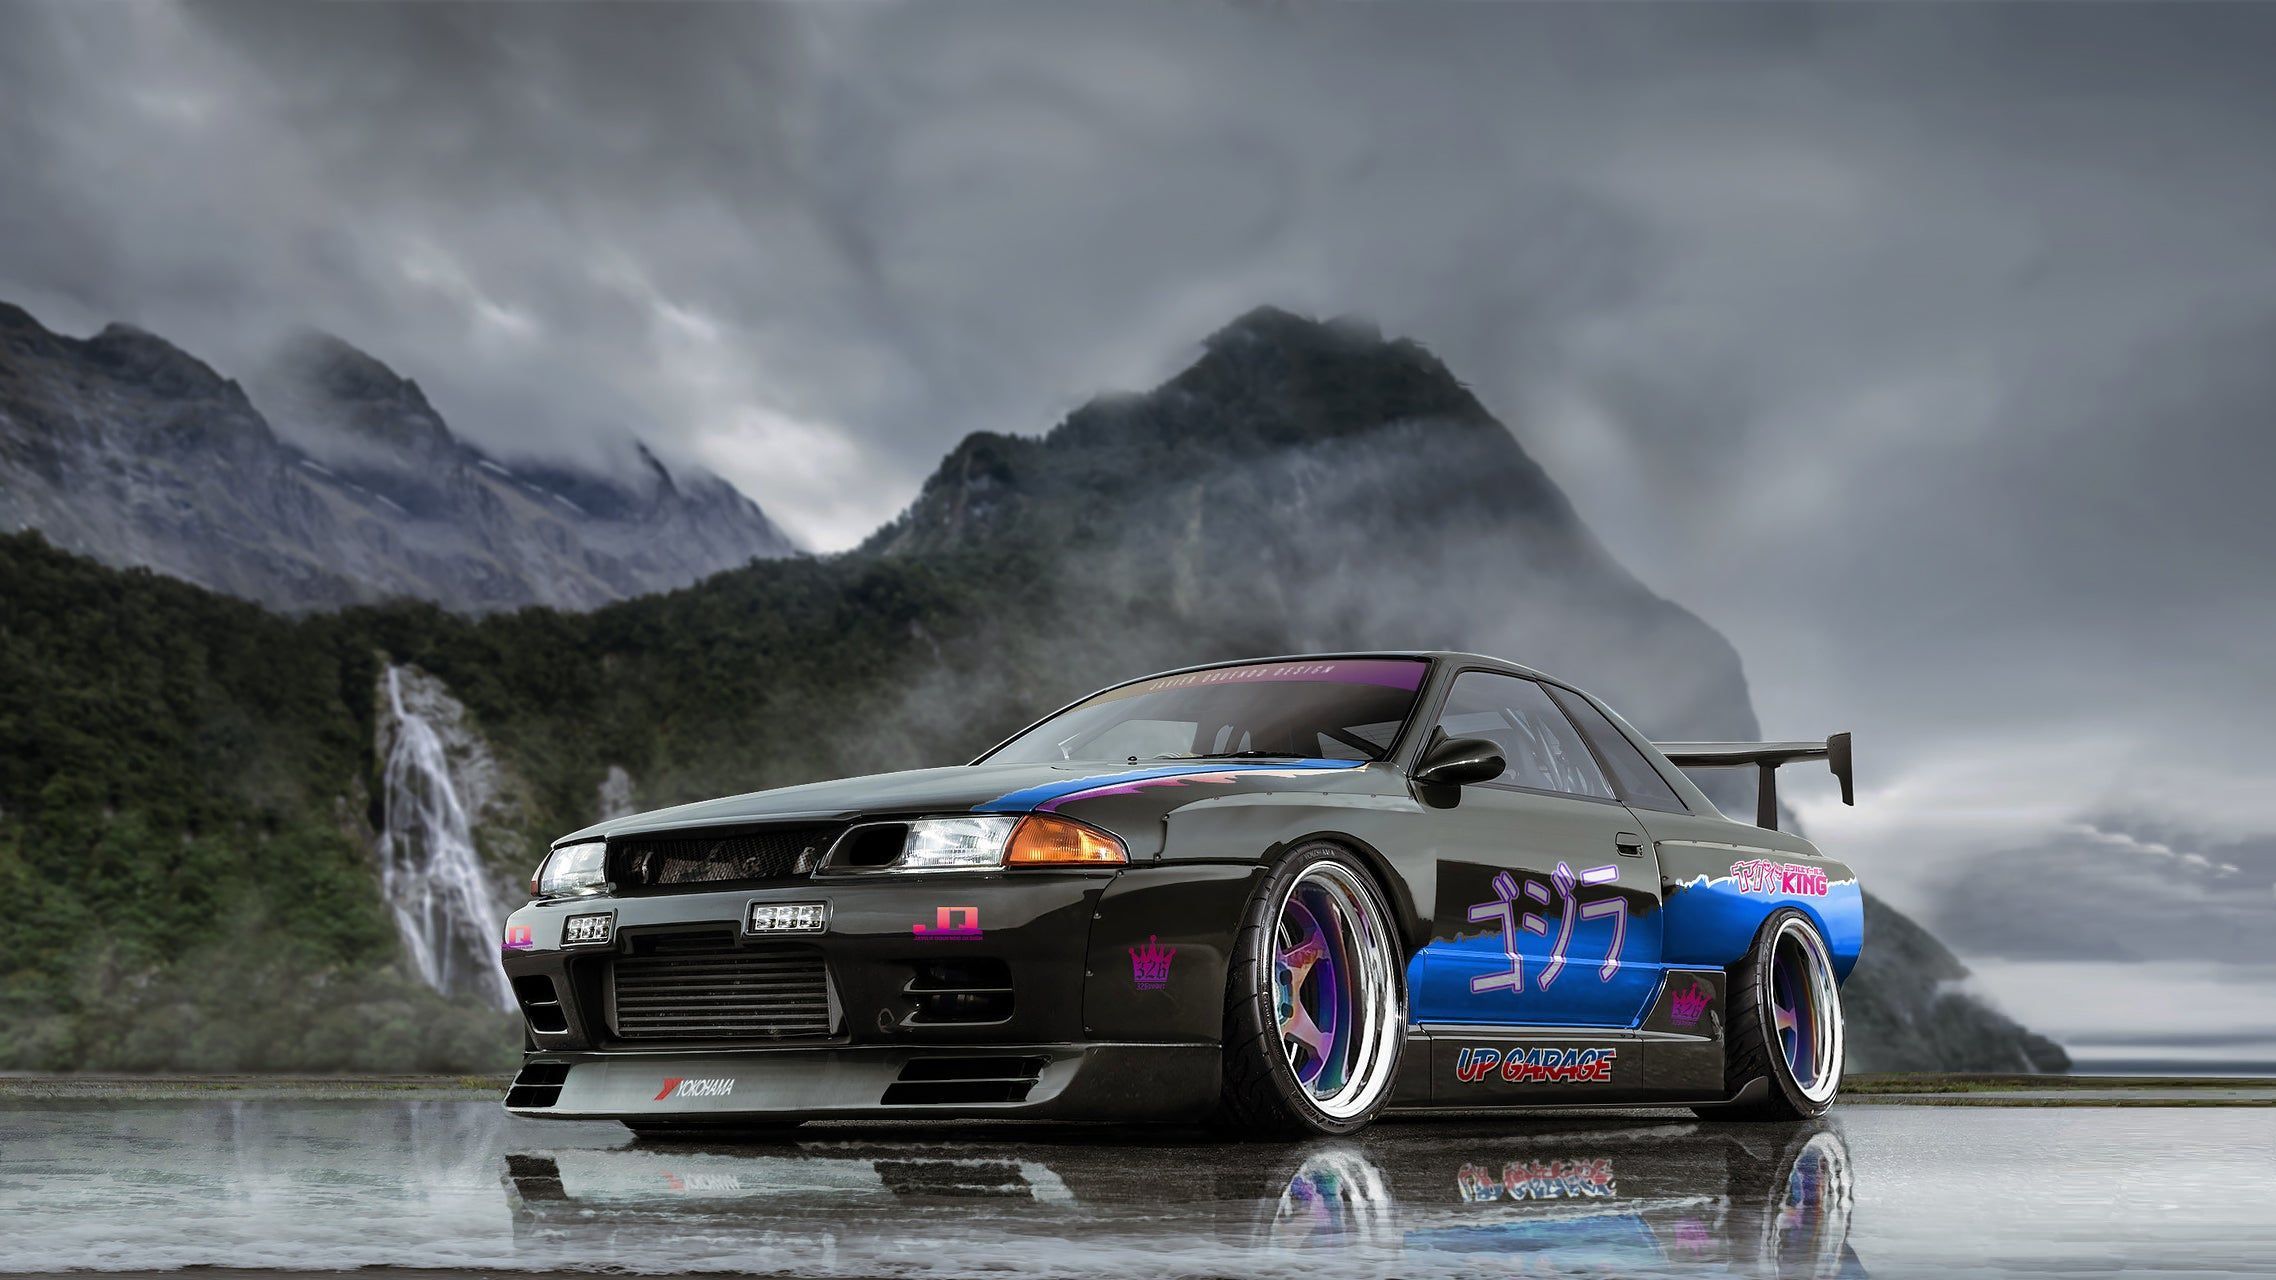 A car is parked in front of mountains - JDM